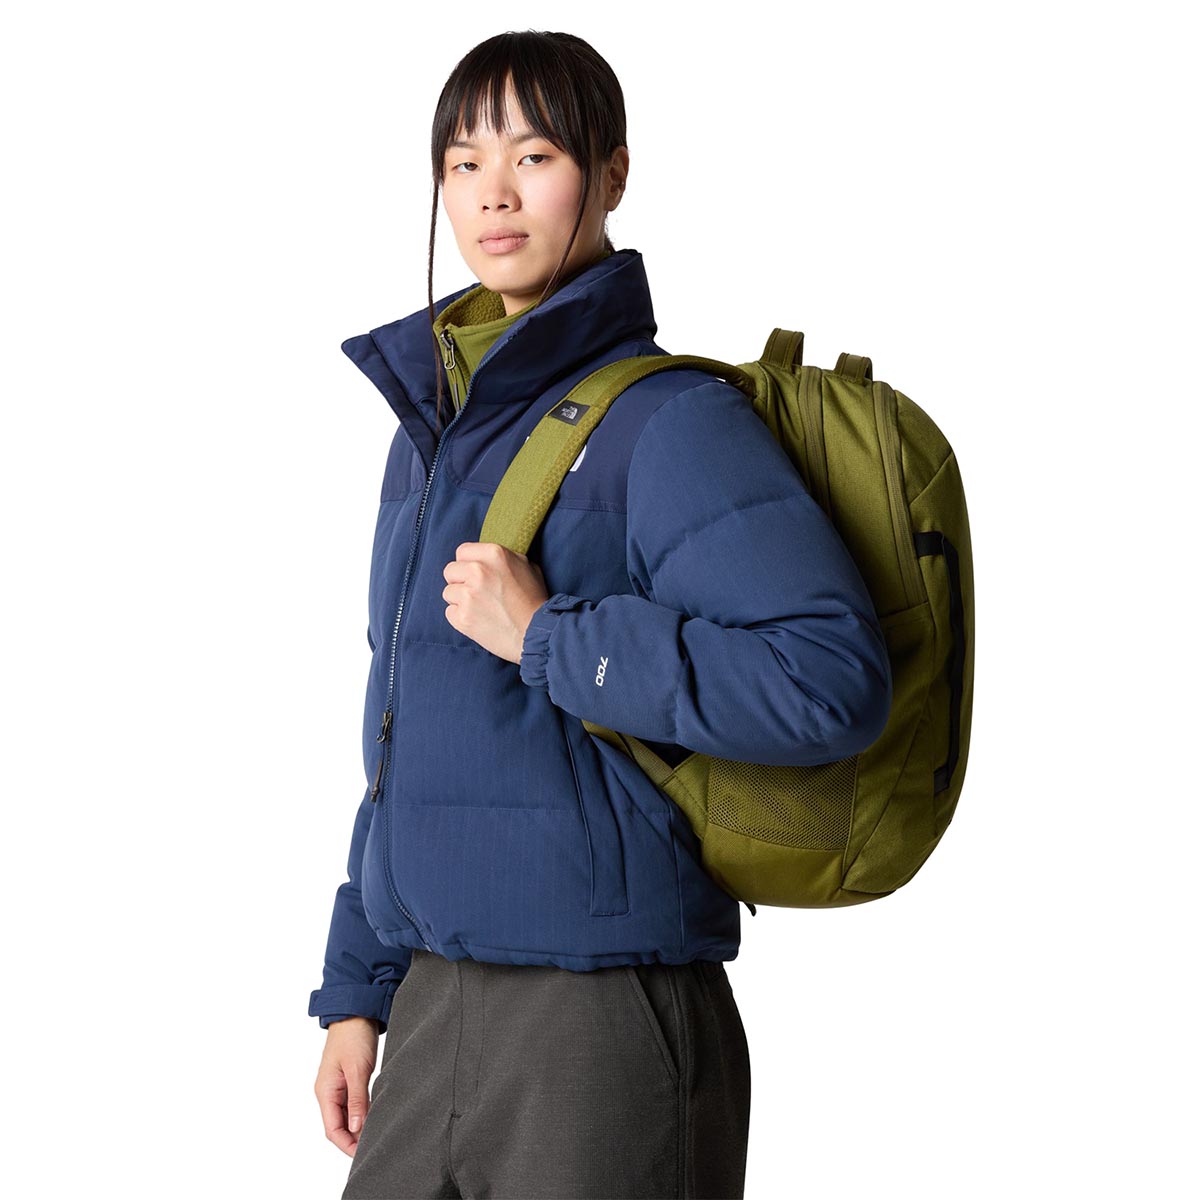 THE NORTH FACE - VAULT BACKPACK 26 L